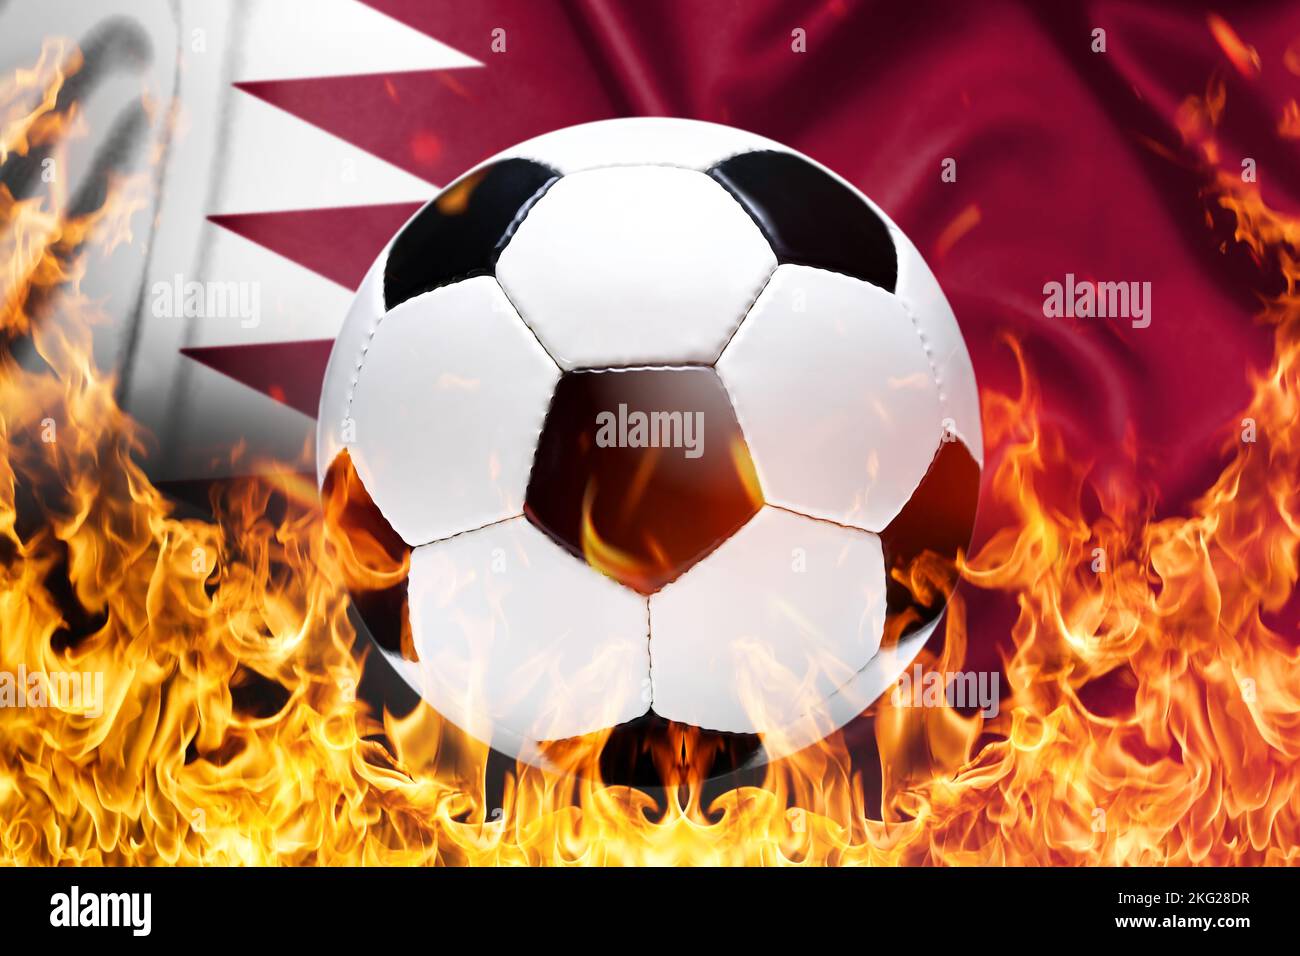 Soccer ball and flames in front of the flag of Qatar, boycott of the football world cup, symbolic image Stock Photo